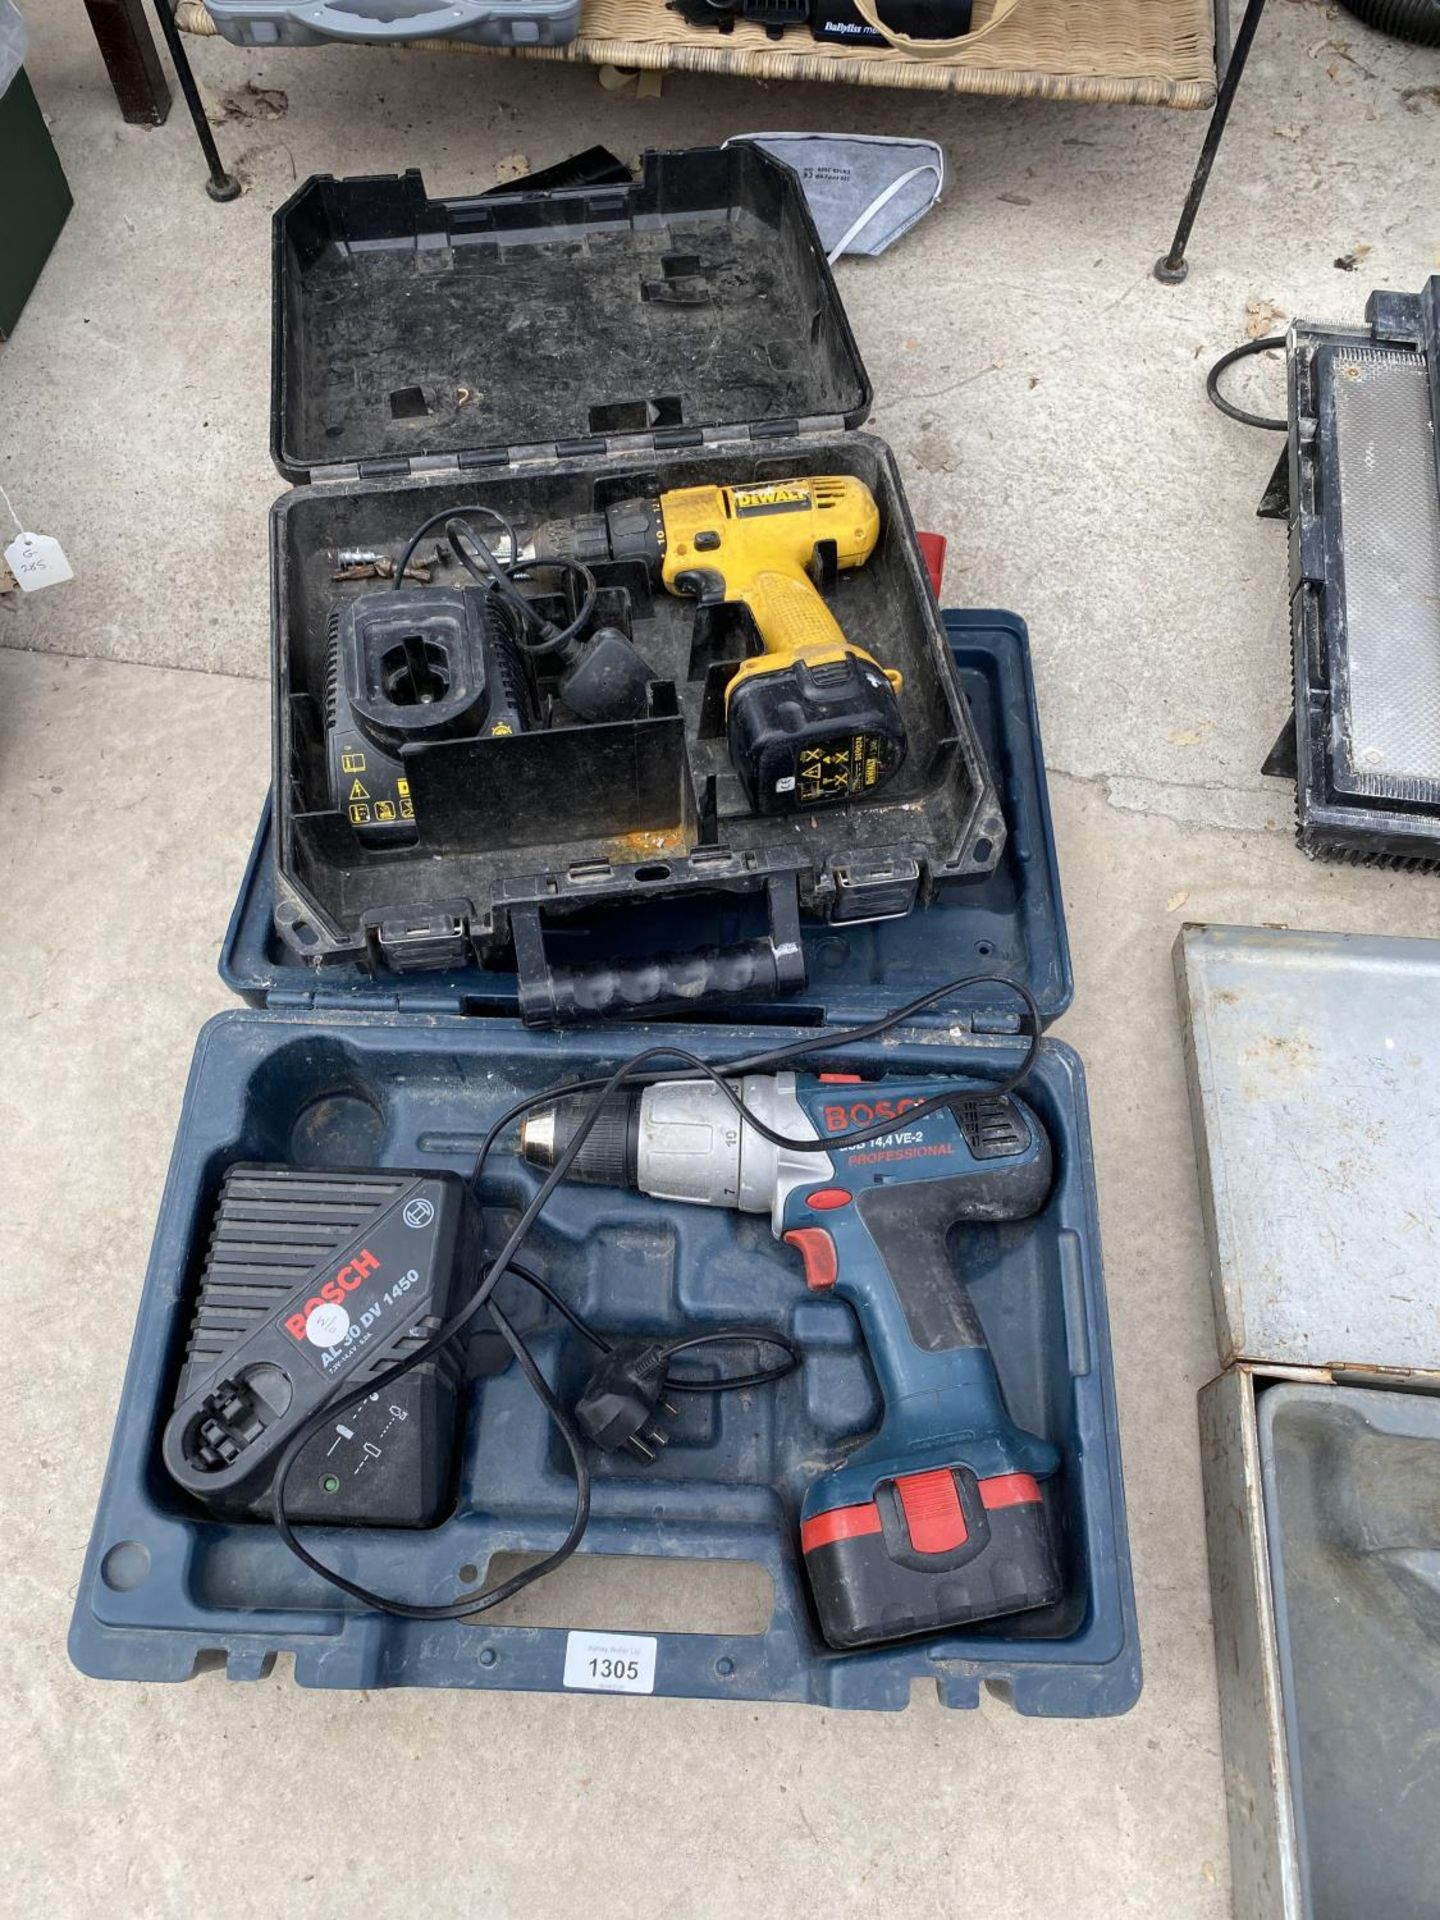 TWO RECHARGEABLE DRILLS - A DEWALT AND A BOSCH, IN WORKING ORDER